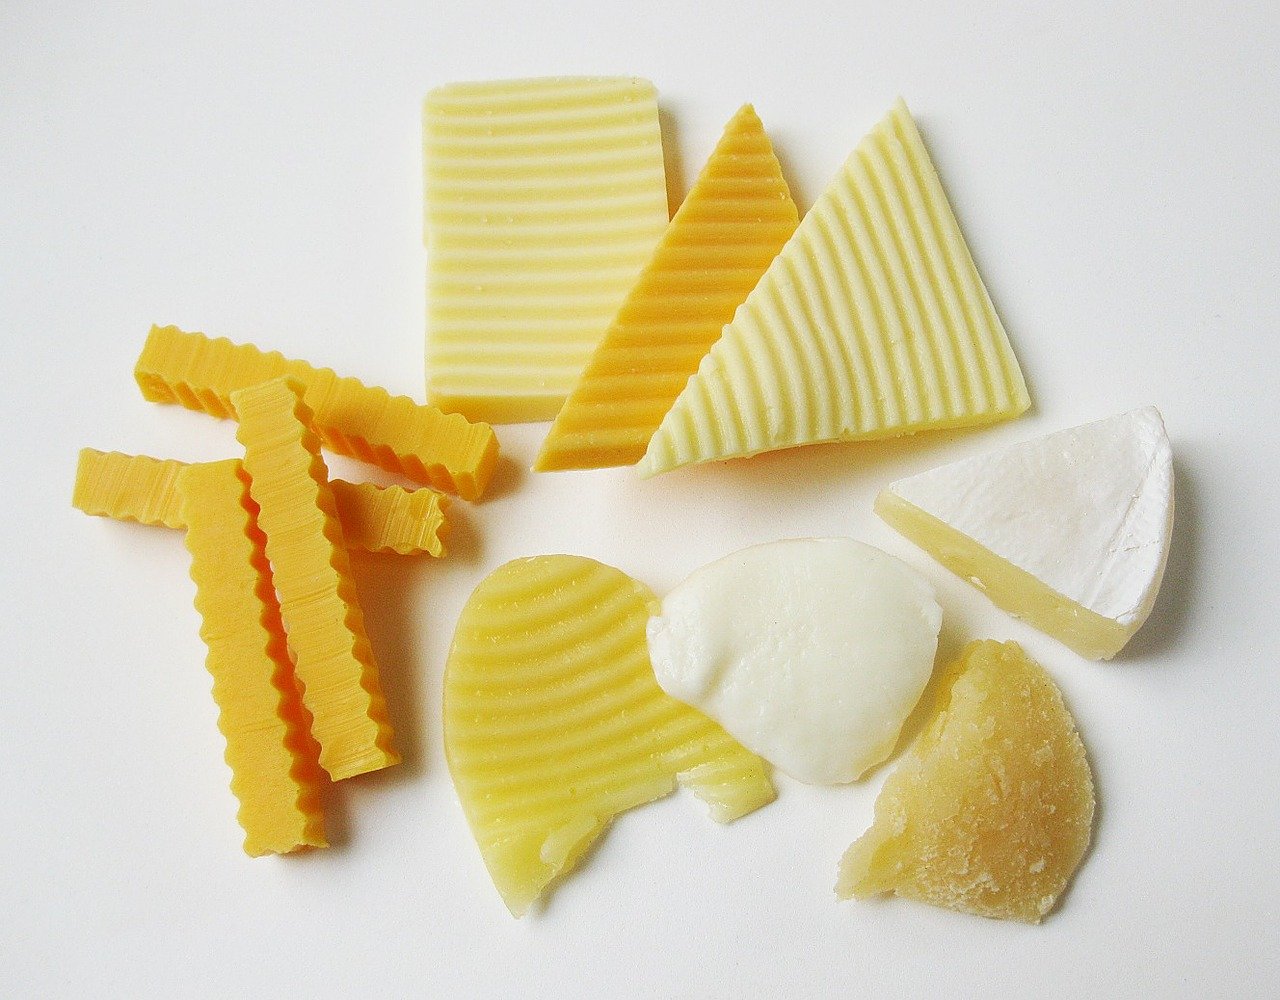 processed foods and dairy products